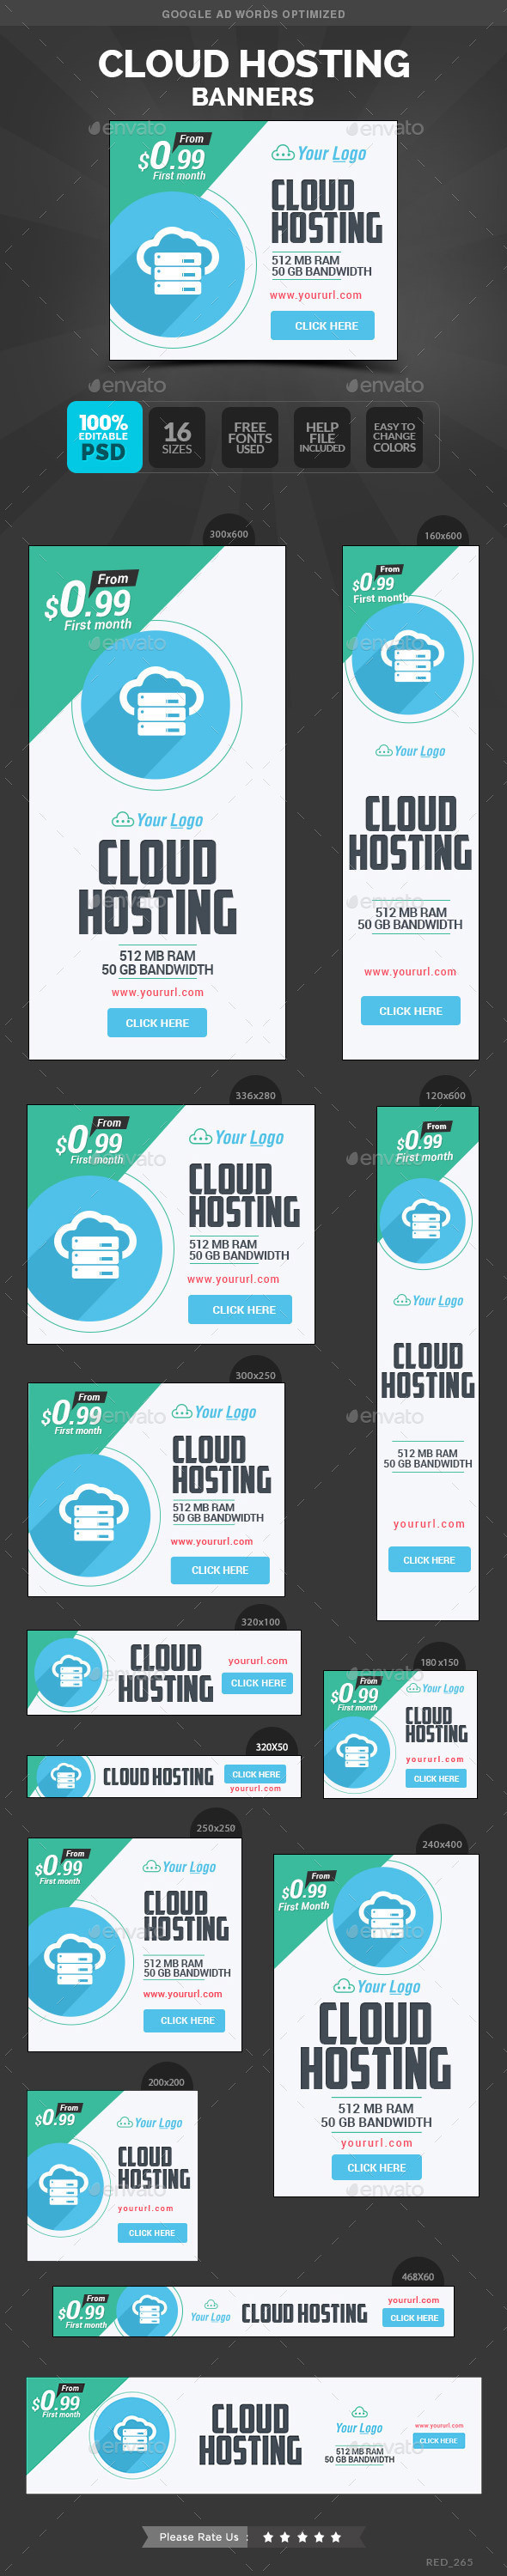 Red 265 cloud 20hosting 20banners preview